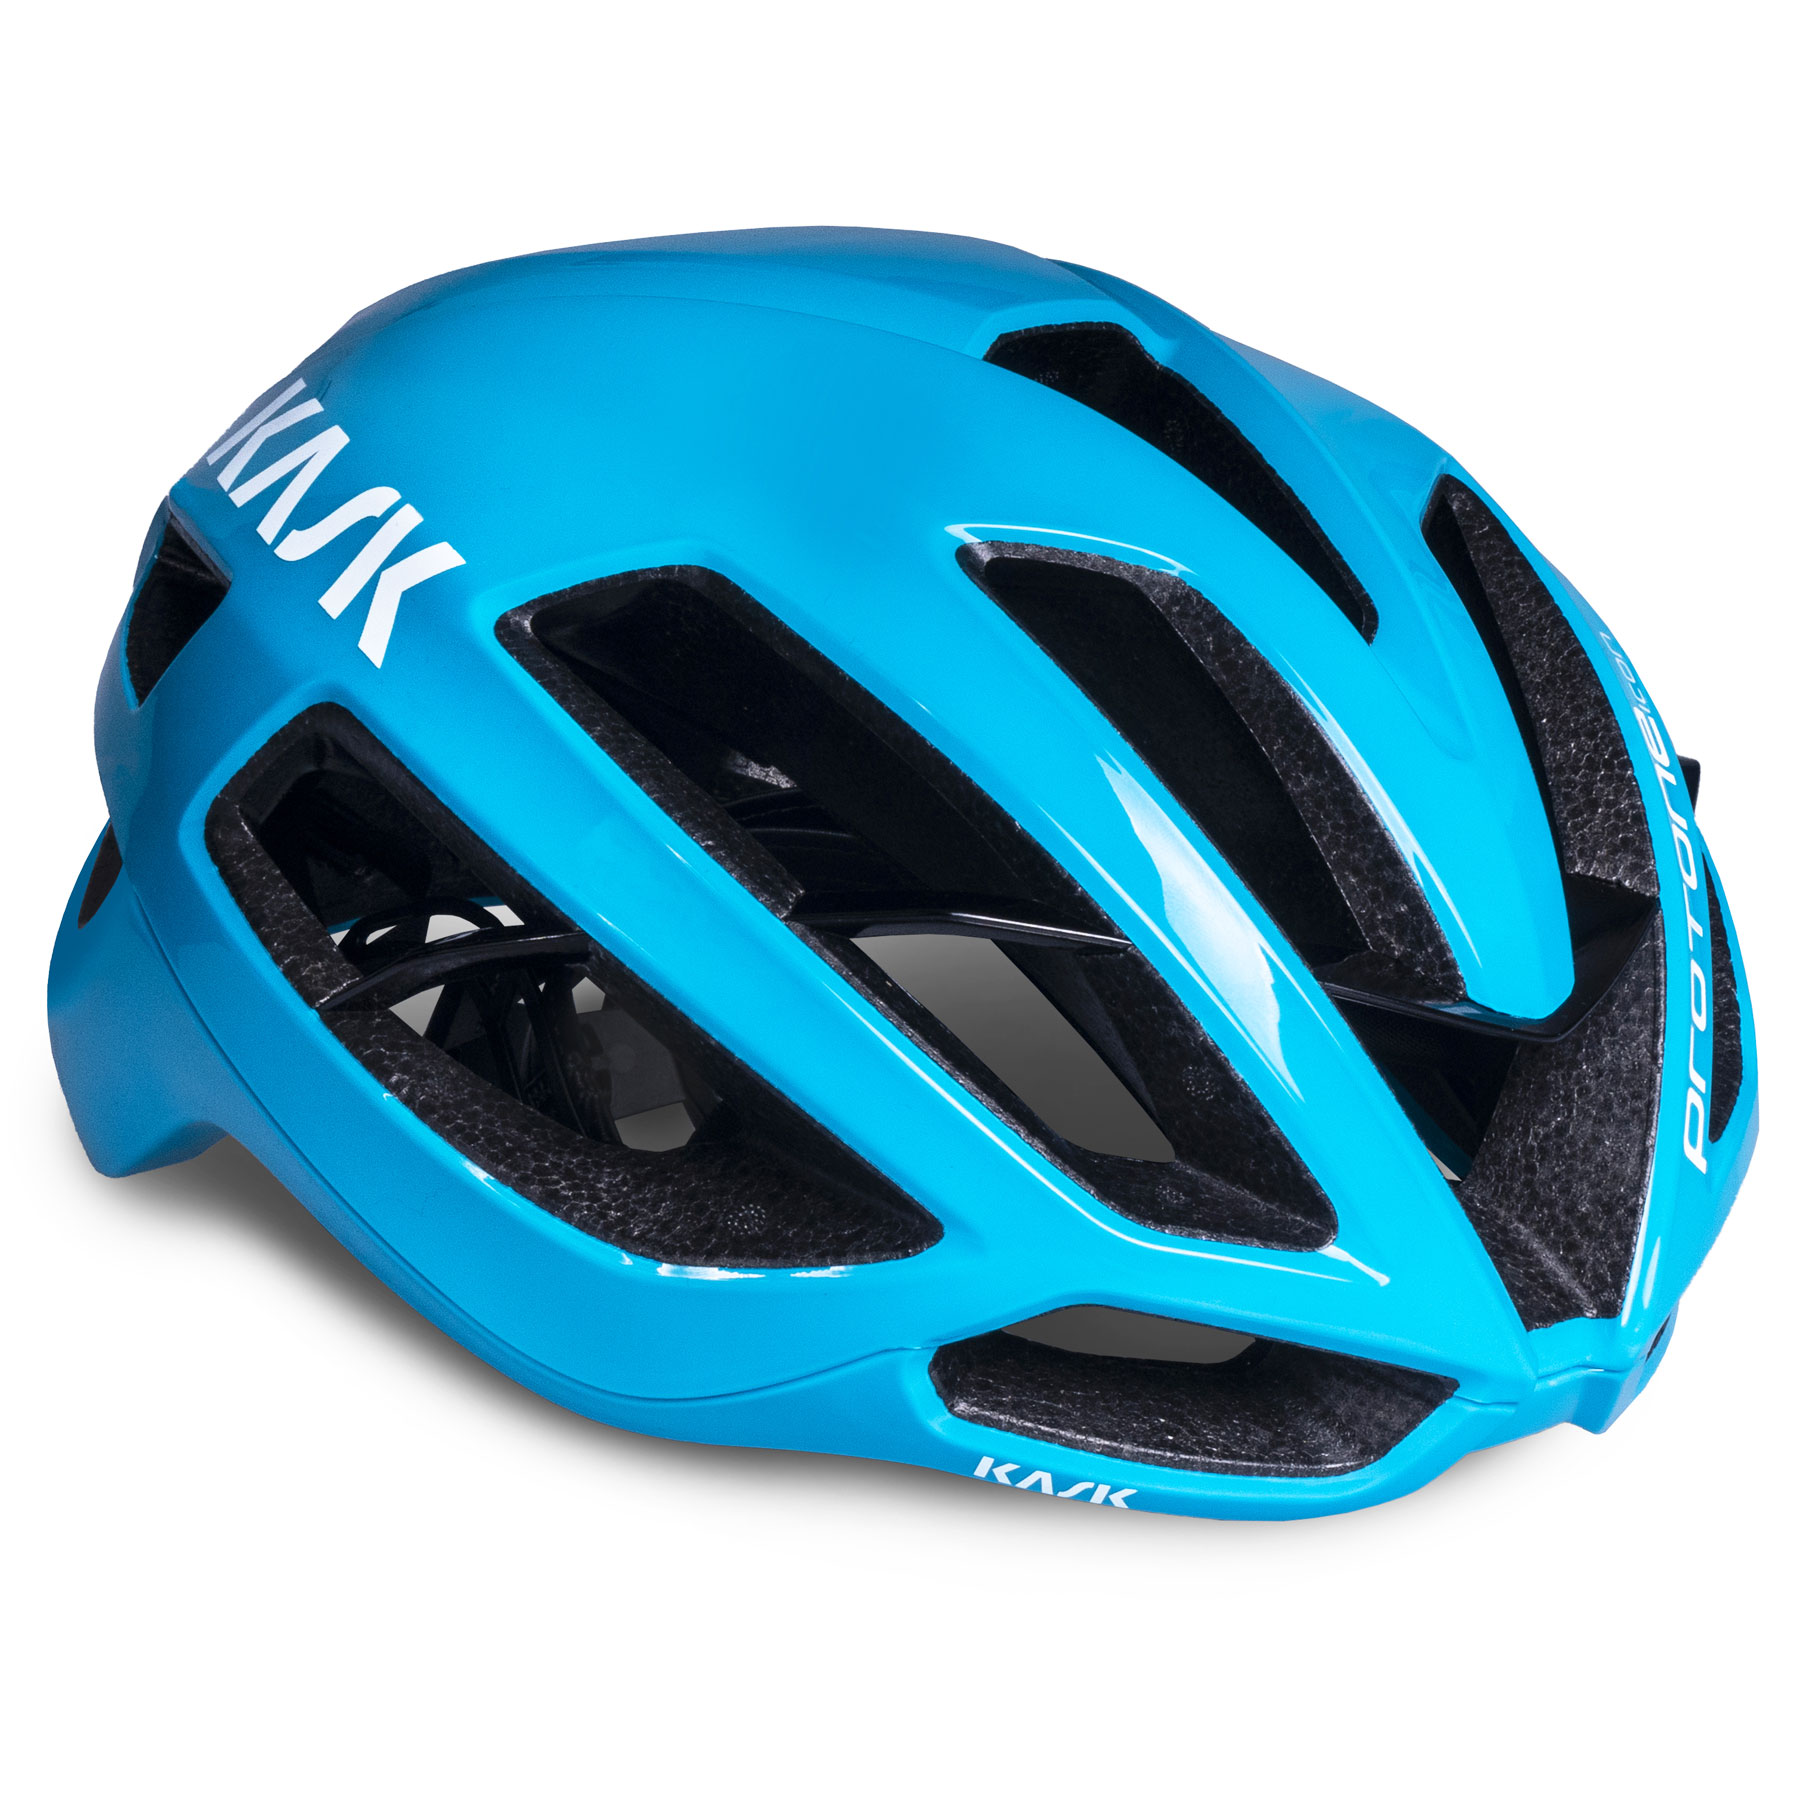 Picture of KASK Protone Icon WG11 Road Helmet - Light Blue